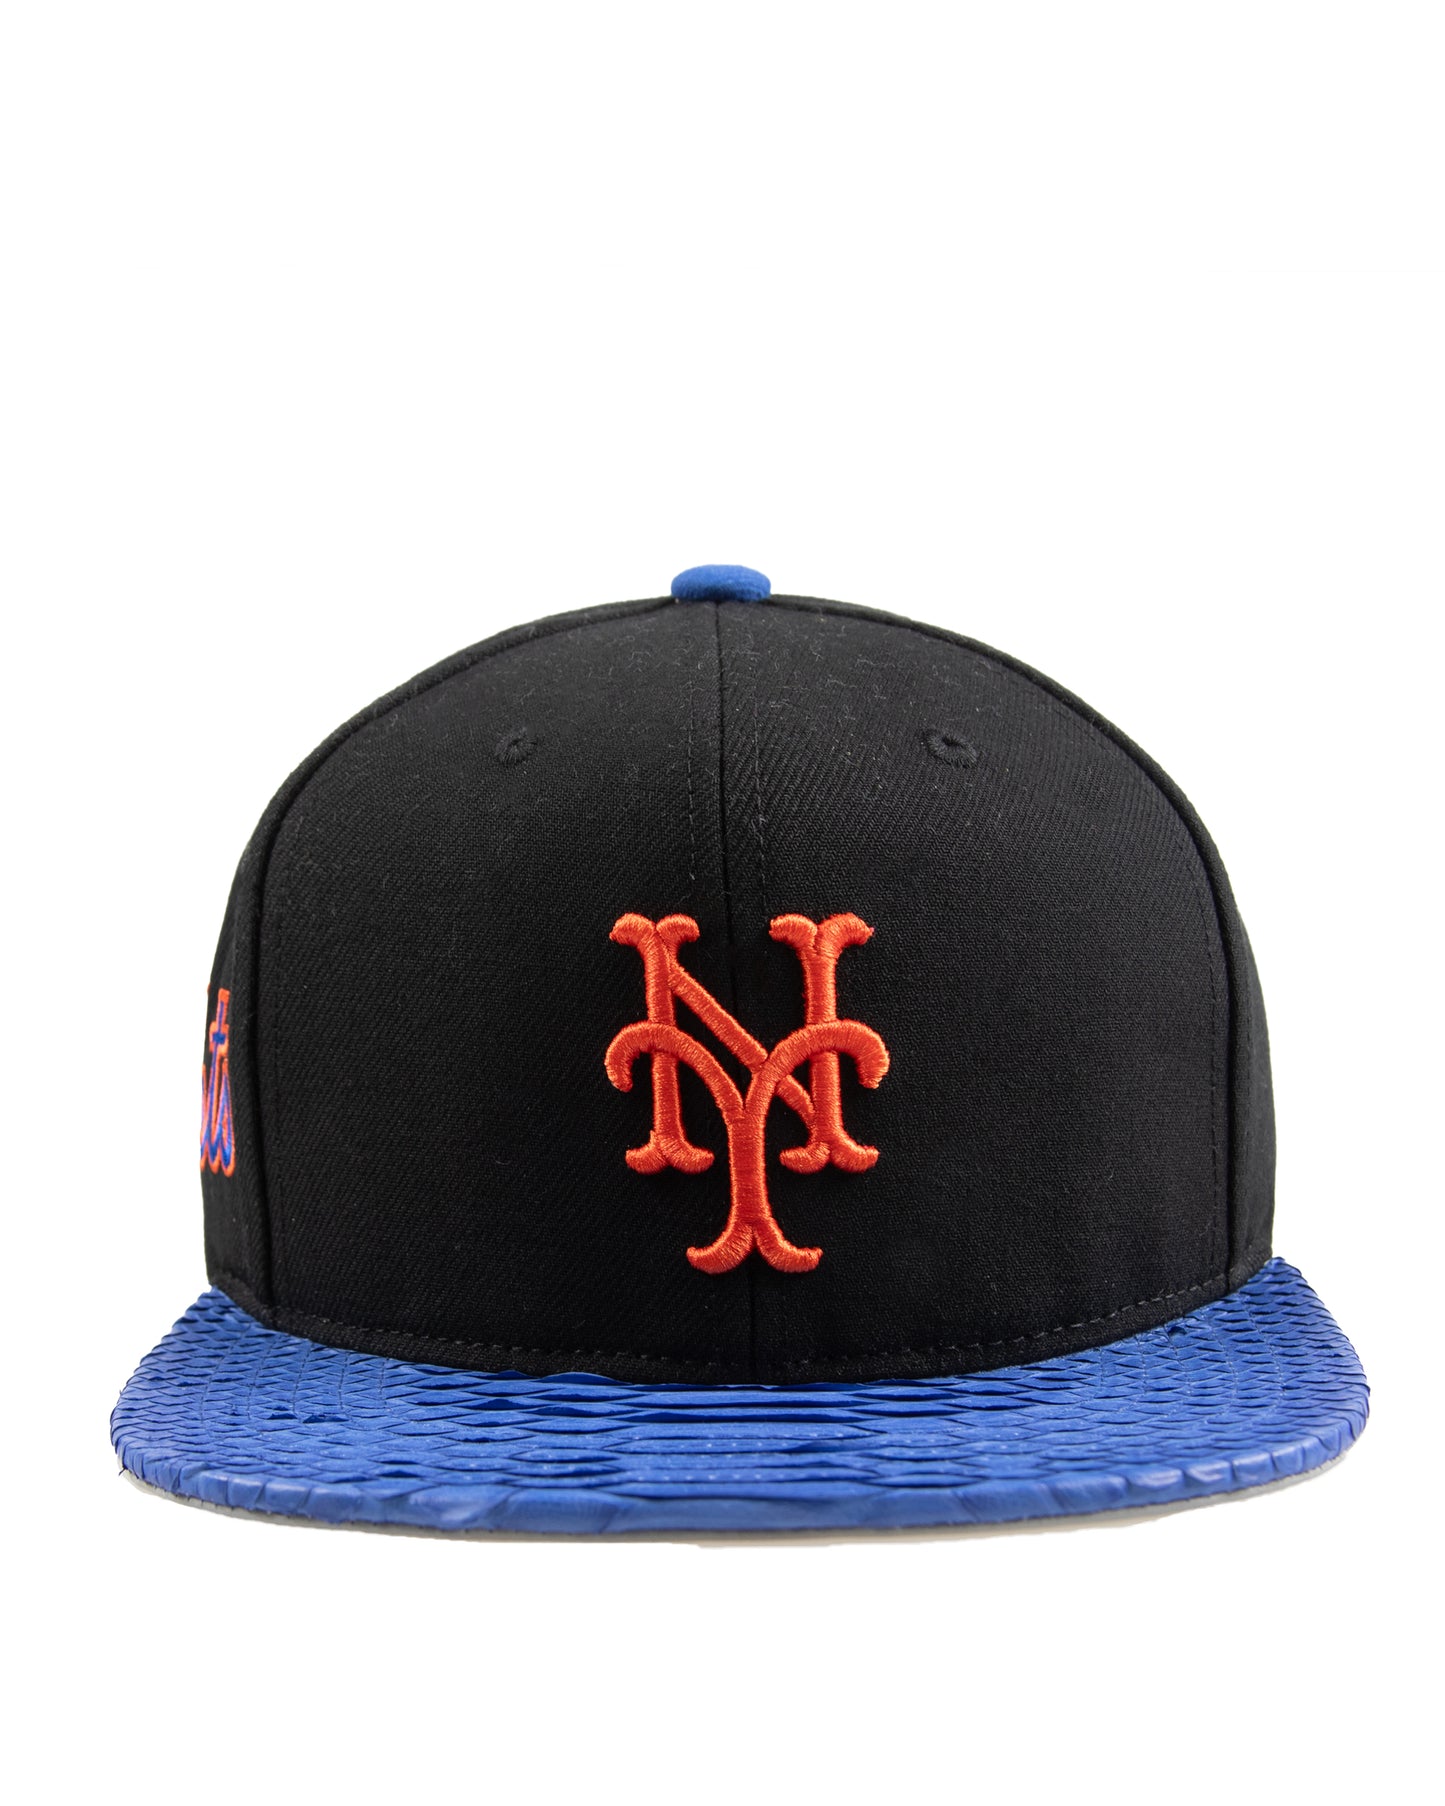 JUST DON NEW YORK METS